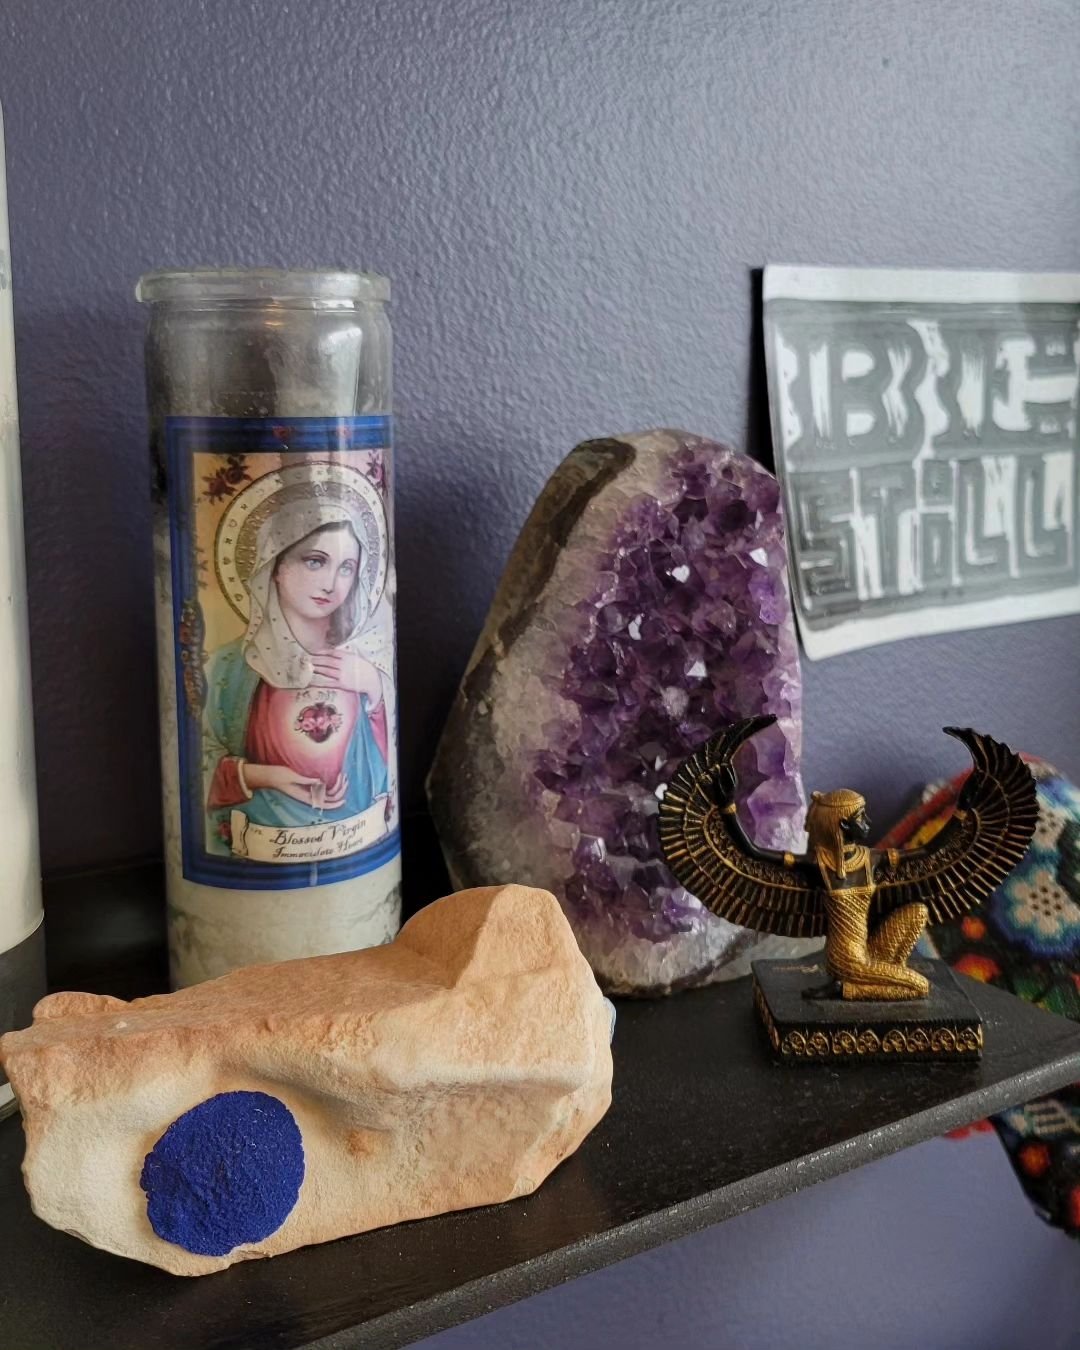 Crystals in their sacred spaces @aprilcornell @altarseattle

#azurite #ethicallysourced #healingcrystals